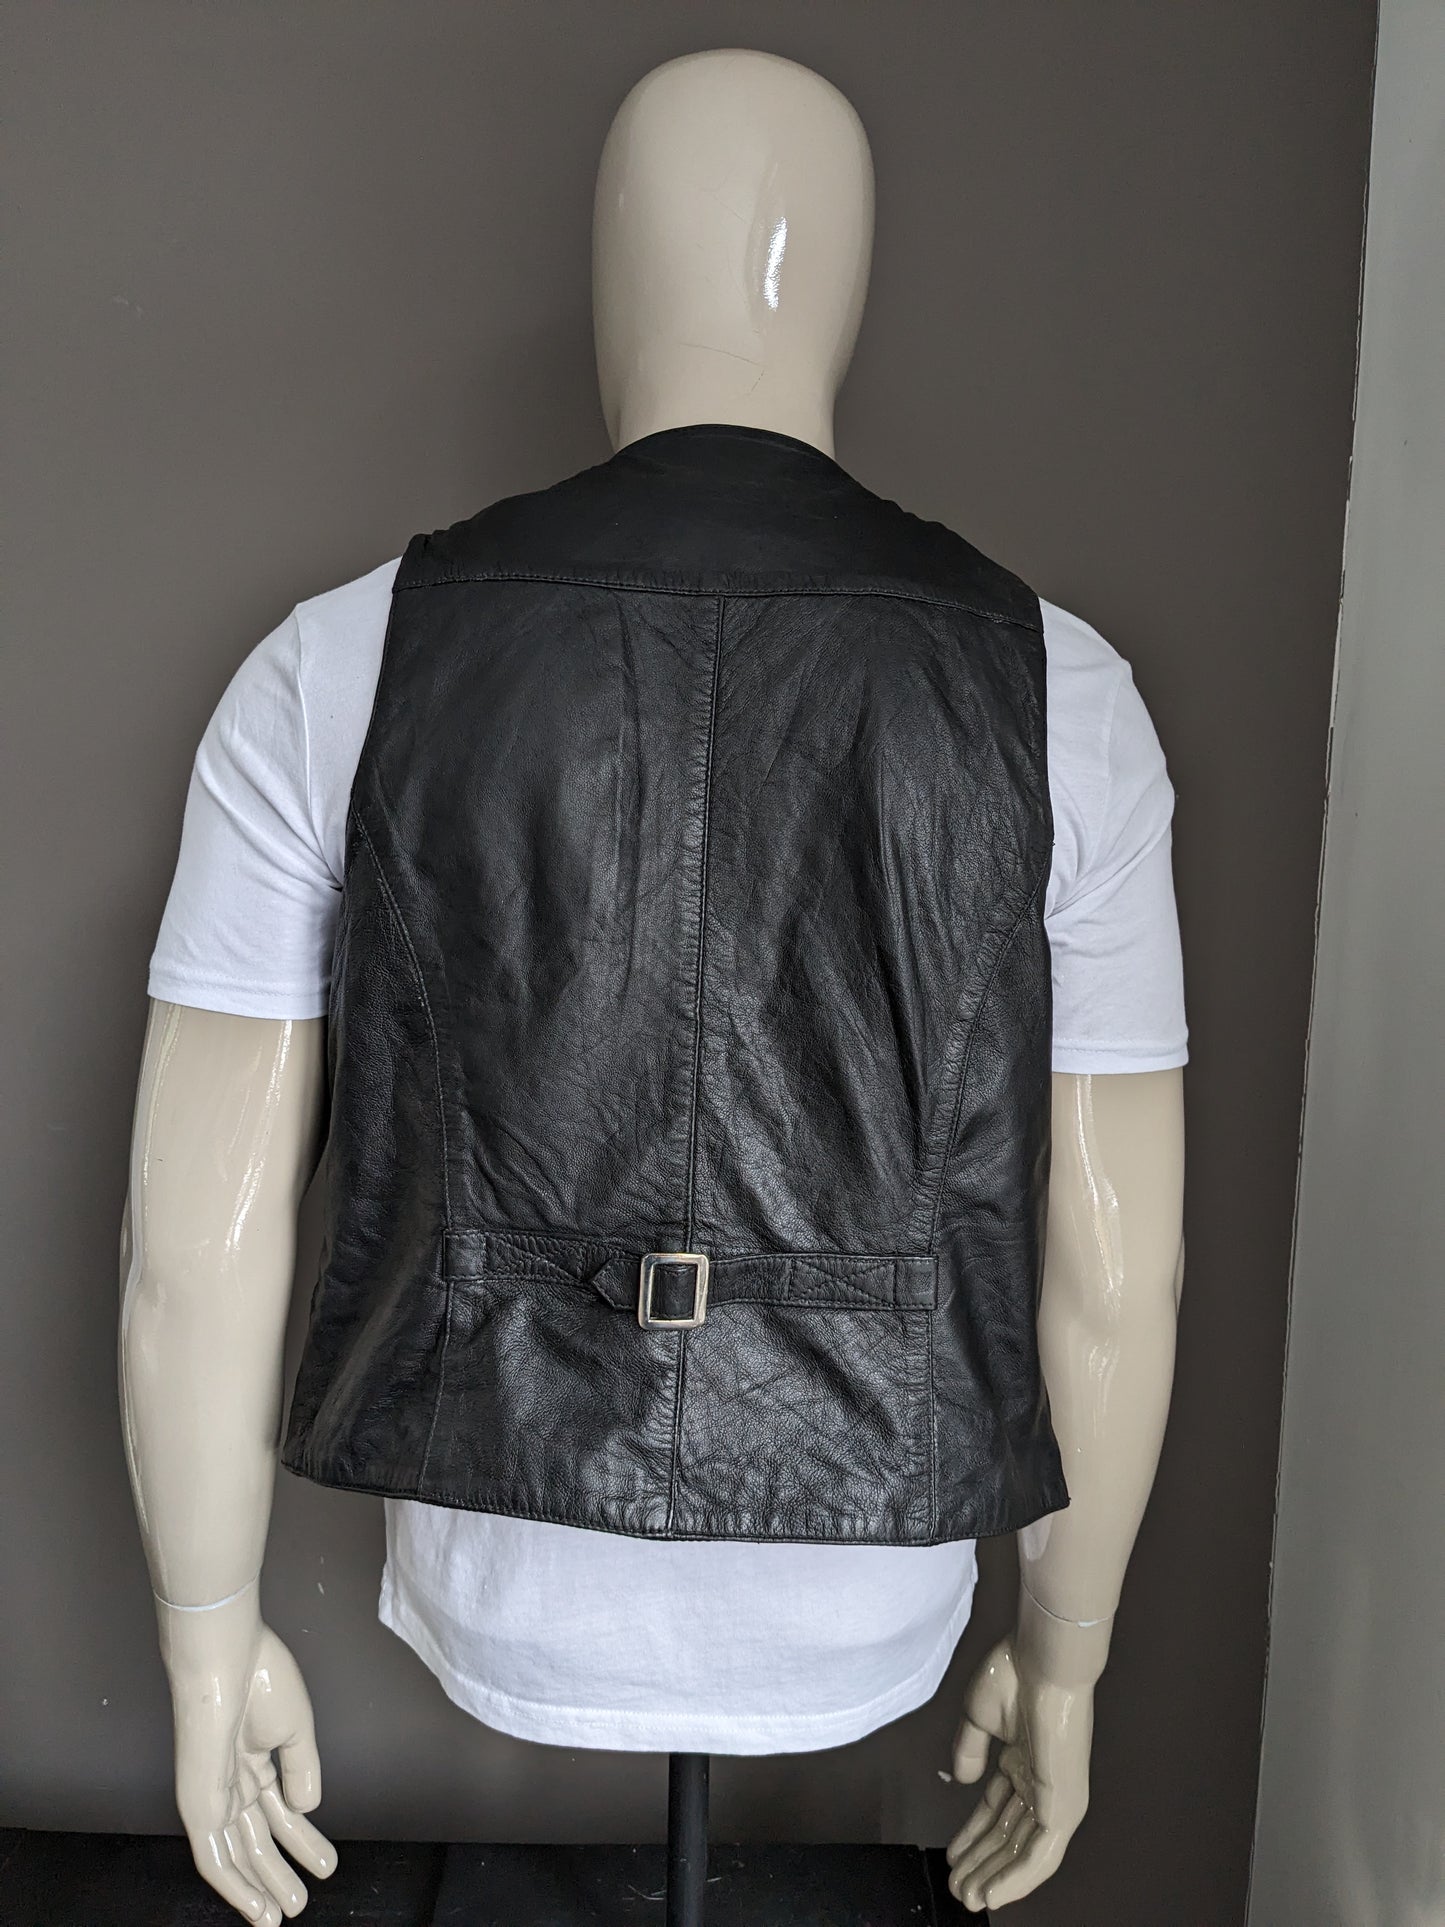 Double -sided abbagliate leather waistcoat with 3 inner pockets. Black. Size 50 / M